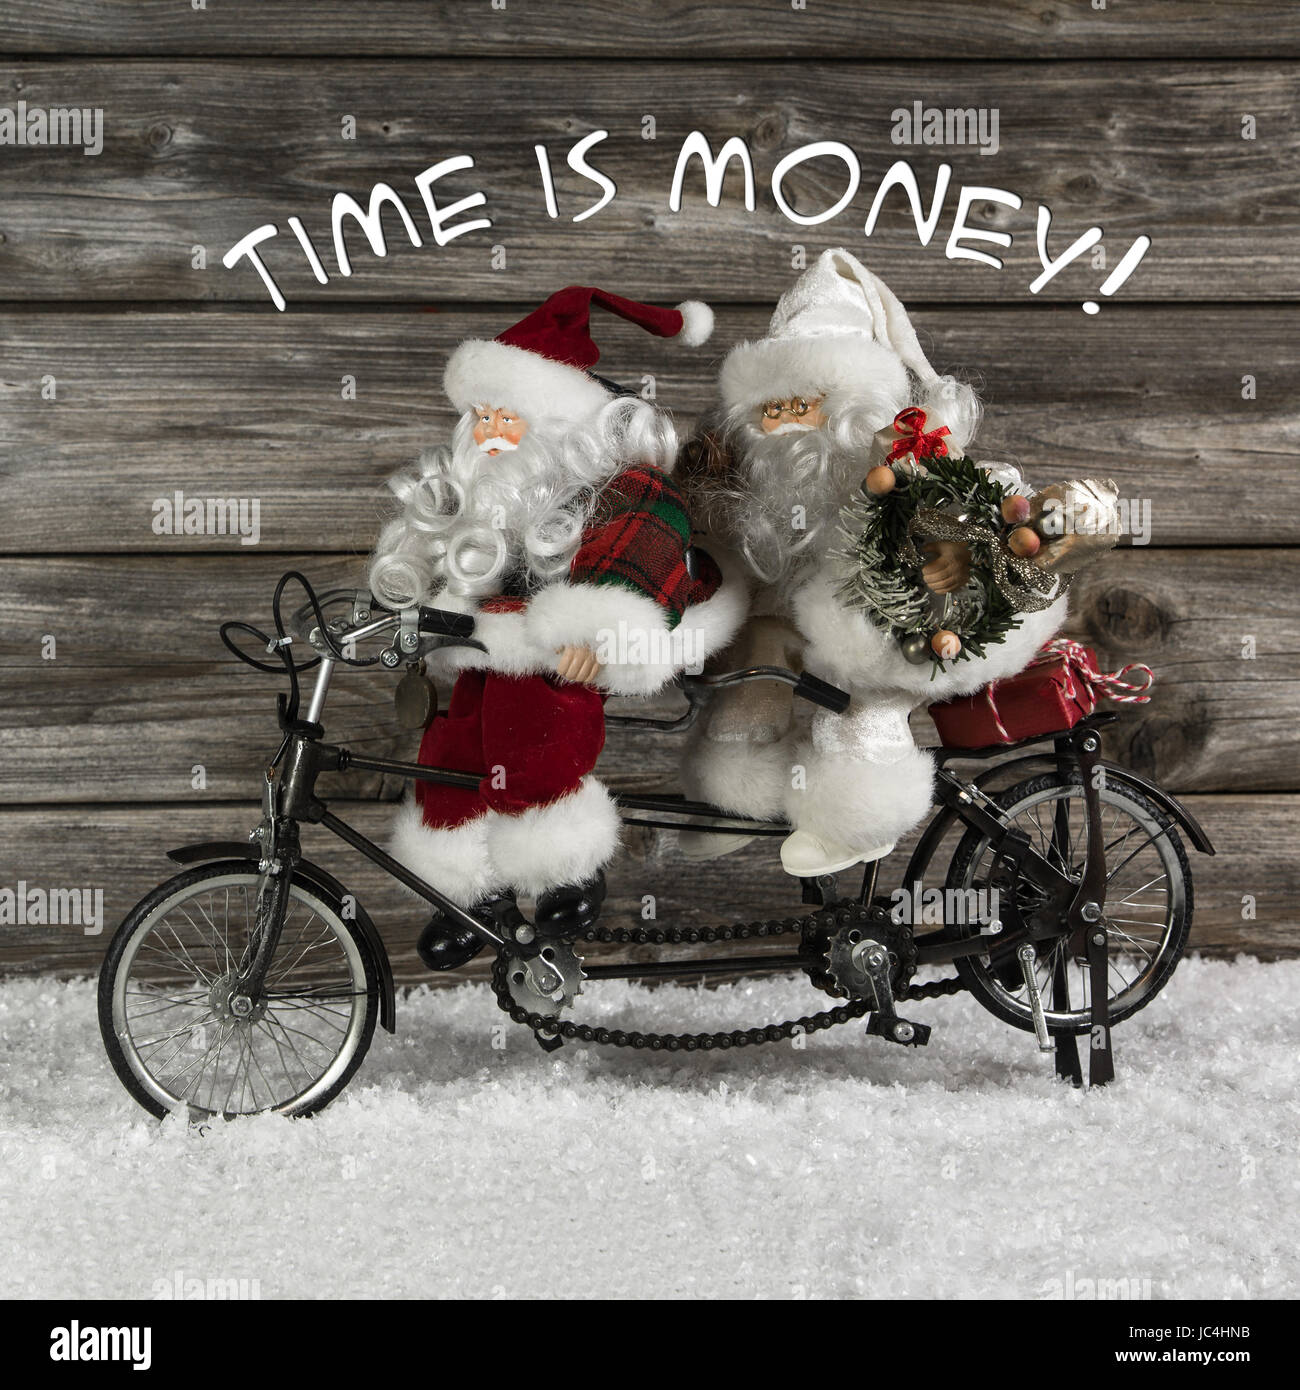 Time is money -  santa claus team in rush for buying christmas presents. Funny photo in vintage style with an old tandem bike of tin. Stock Photo